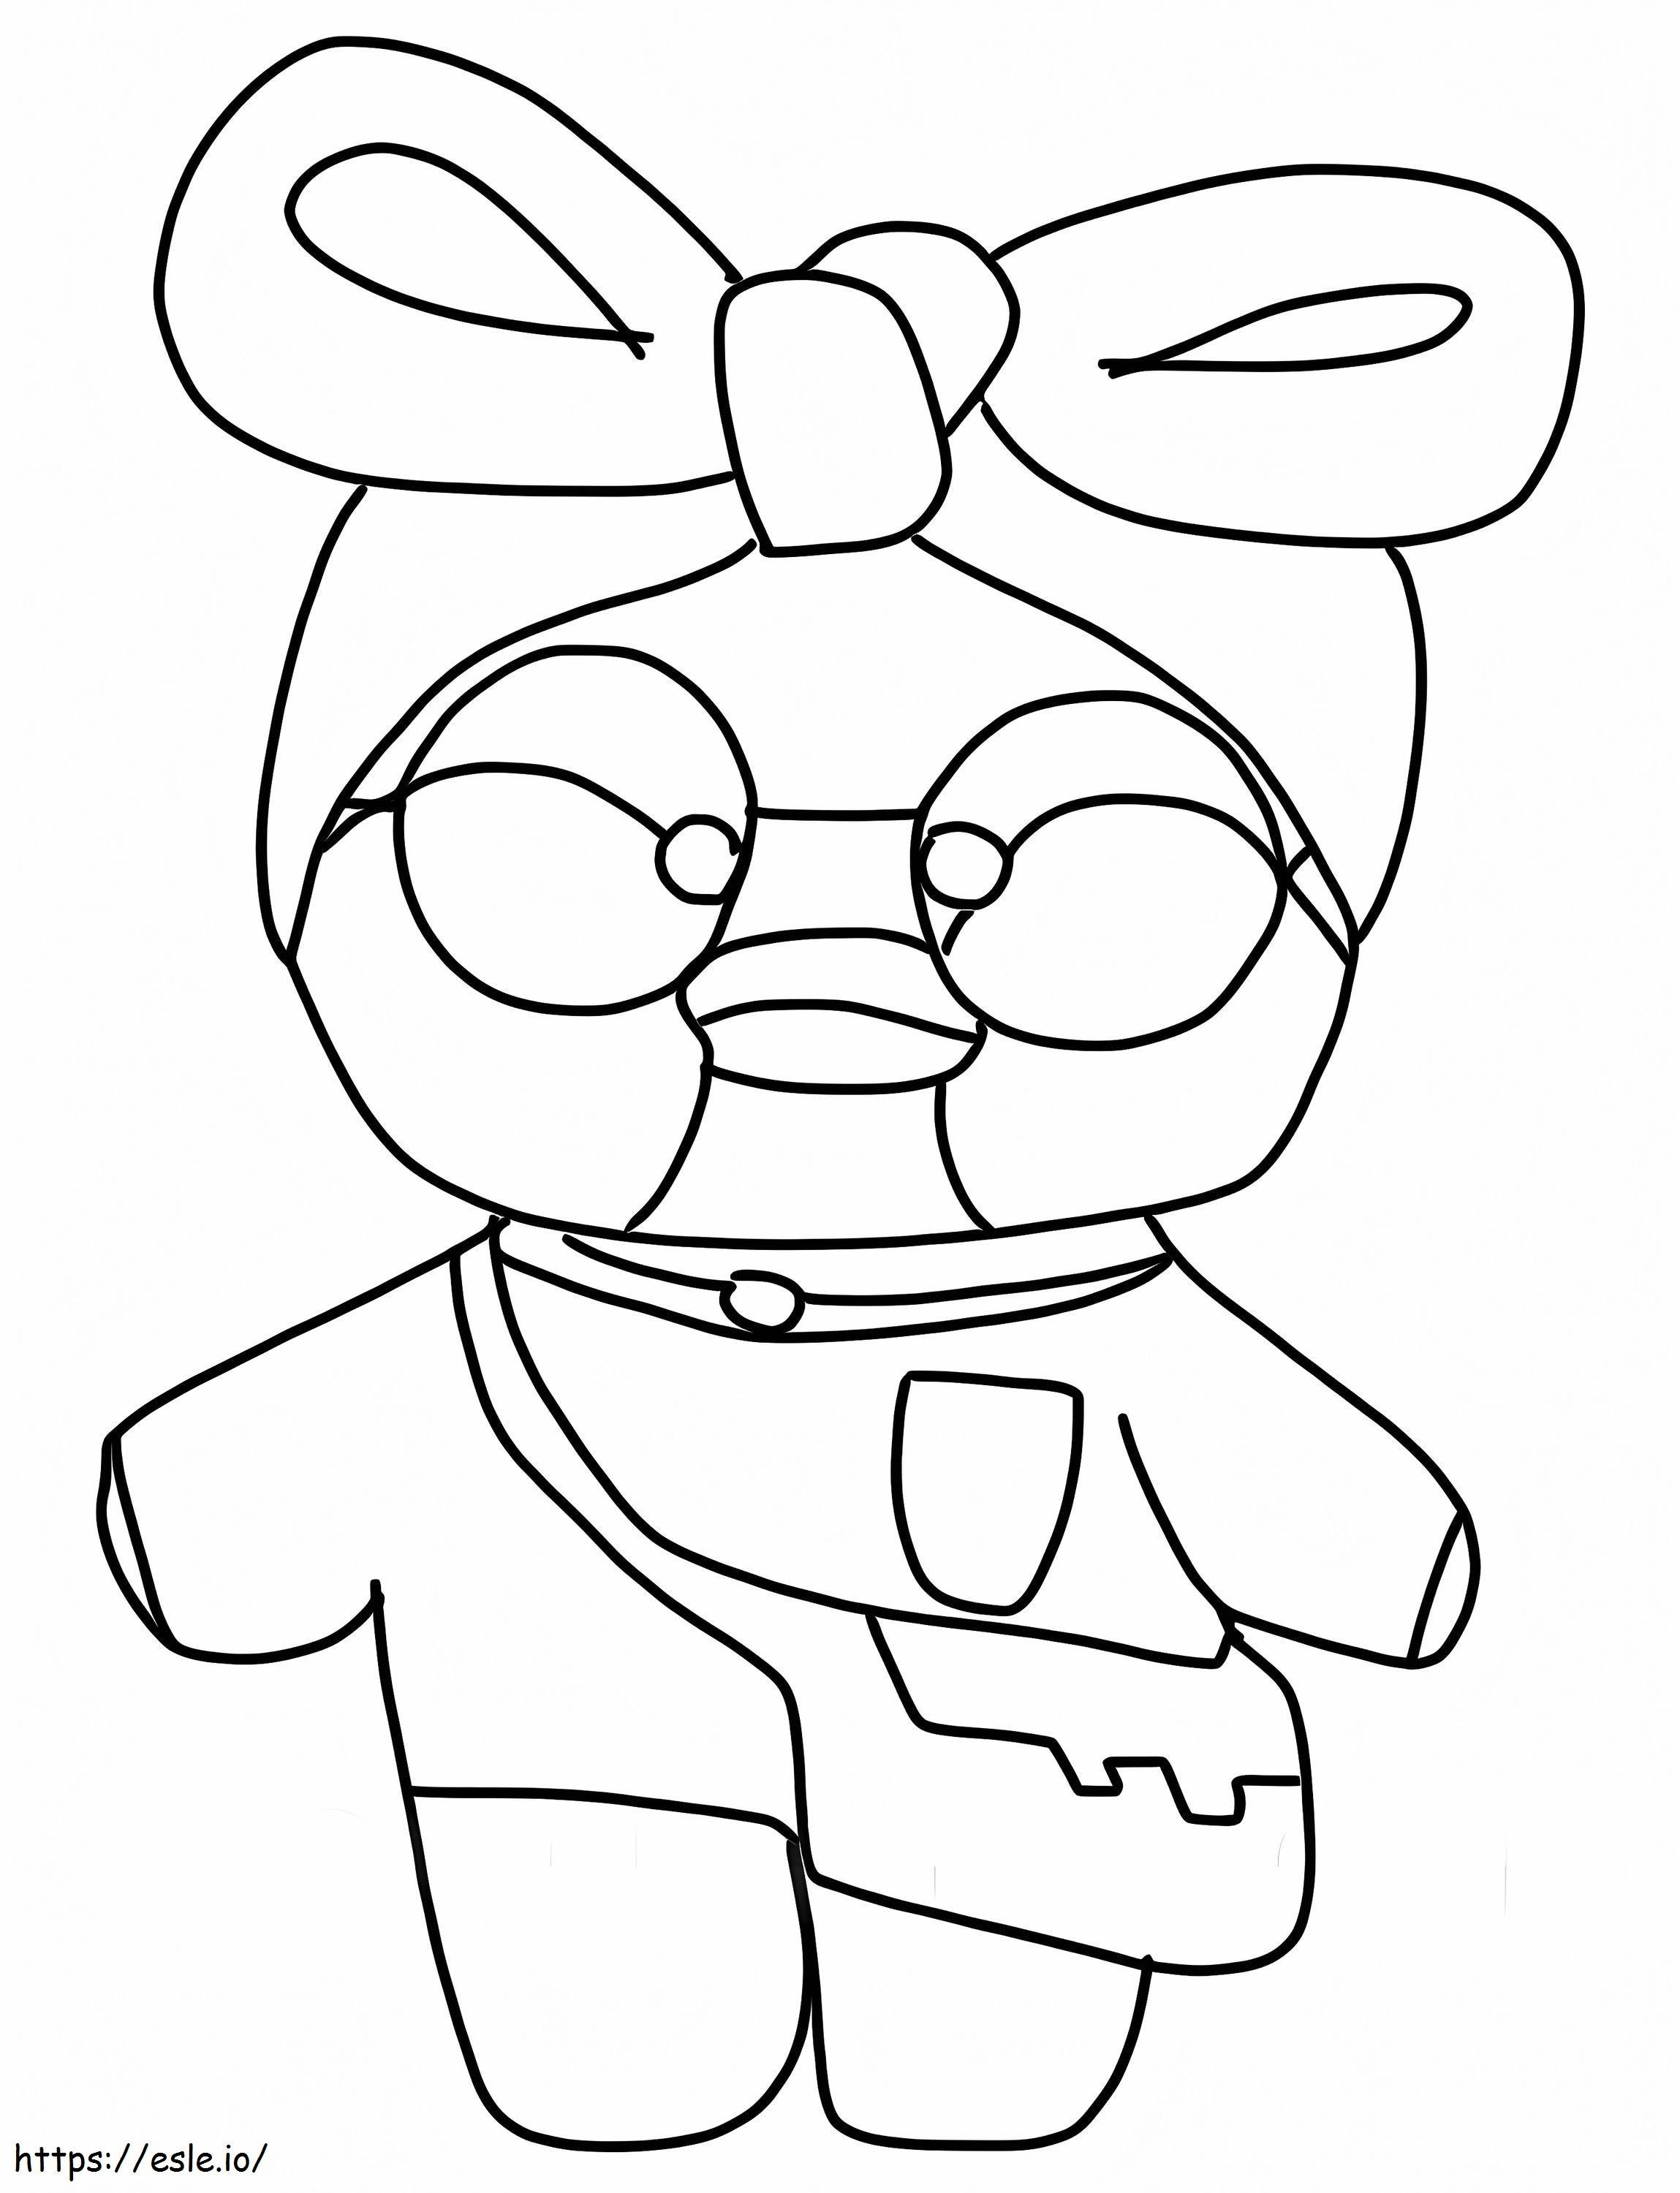 Cute Lalafanfan Duck coloring page